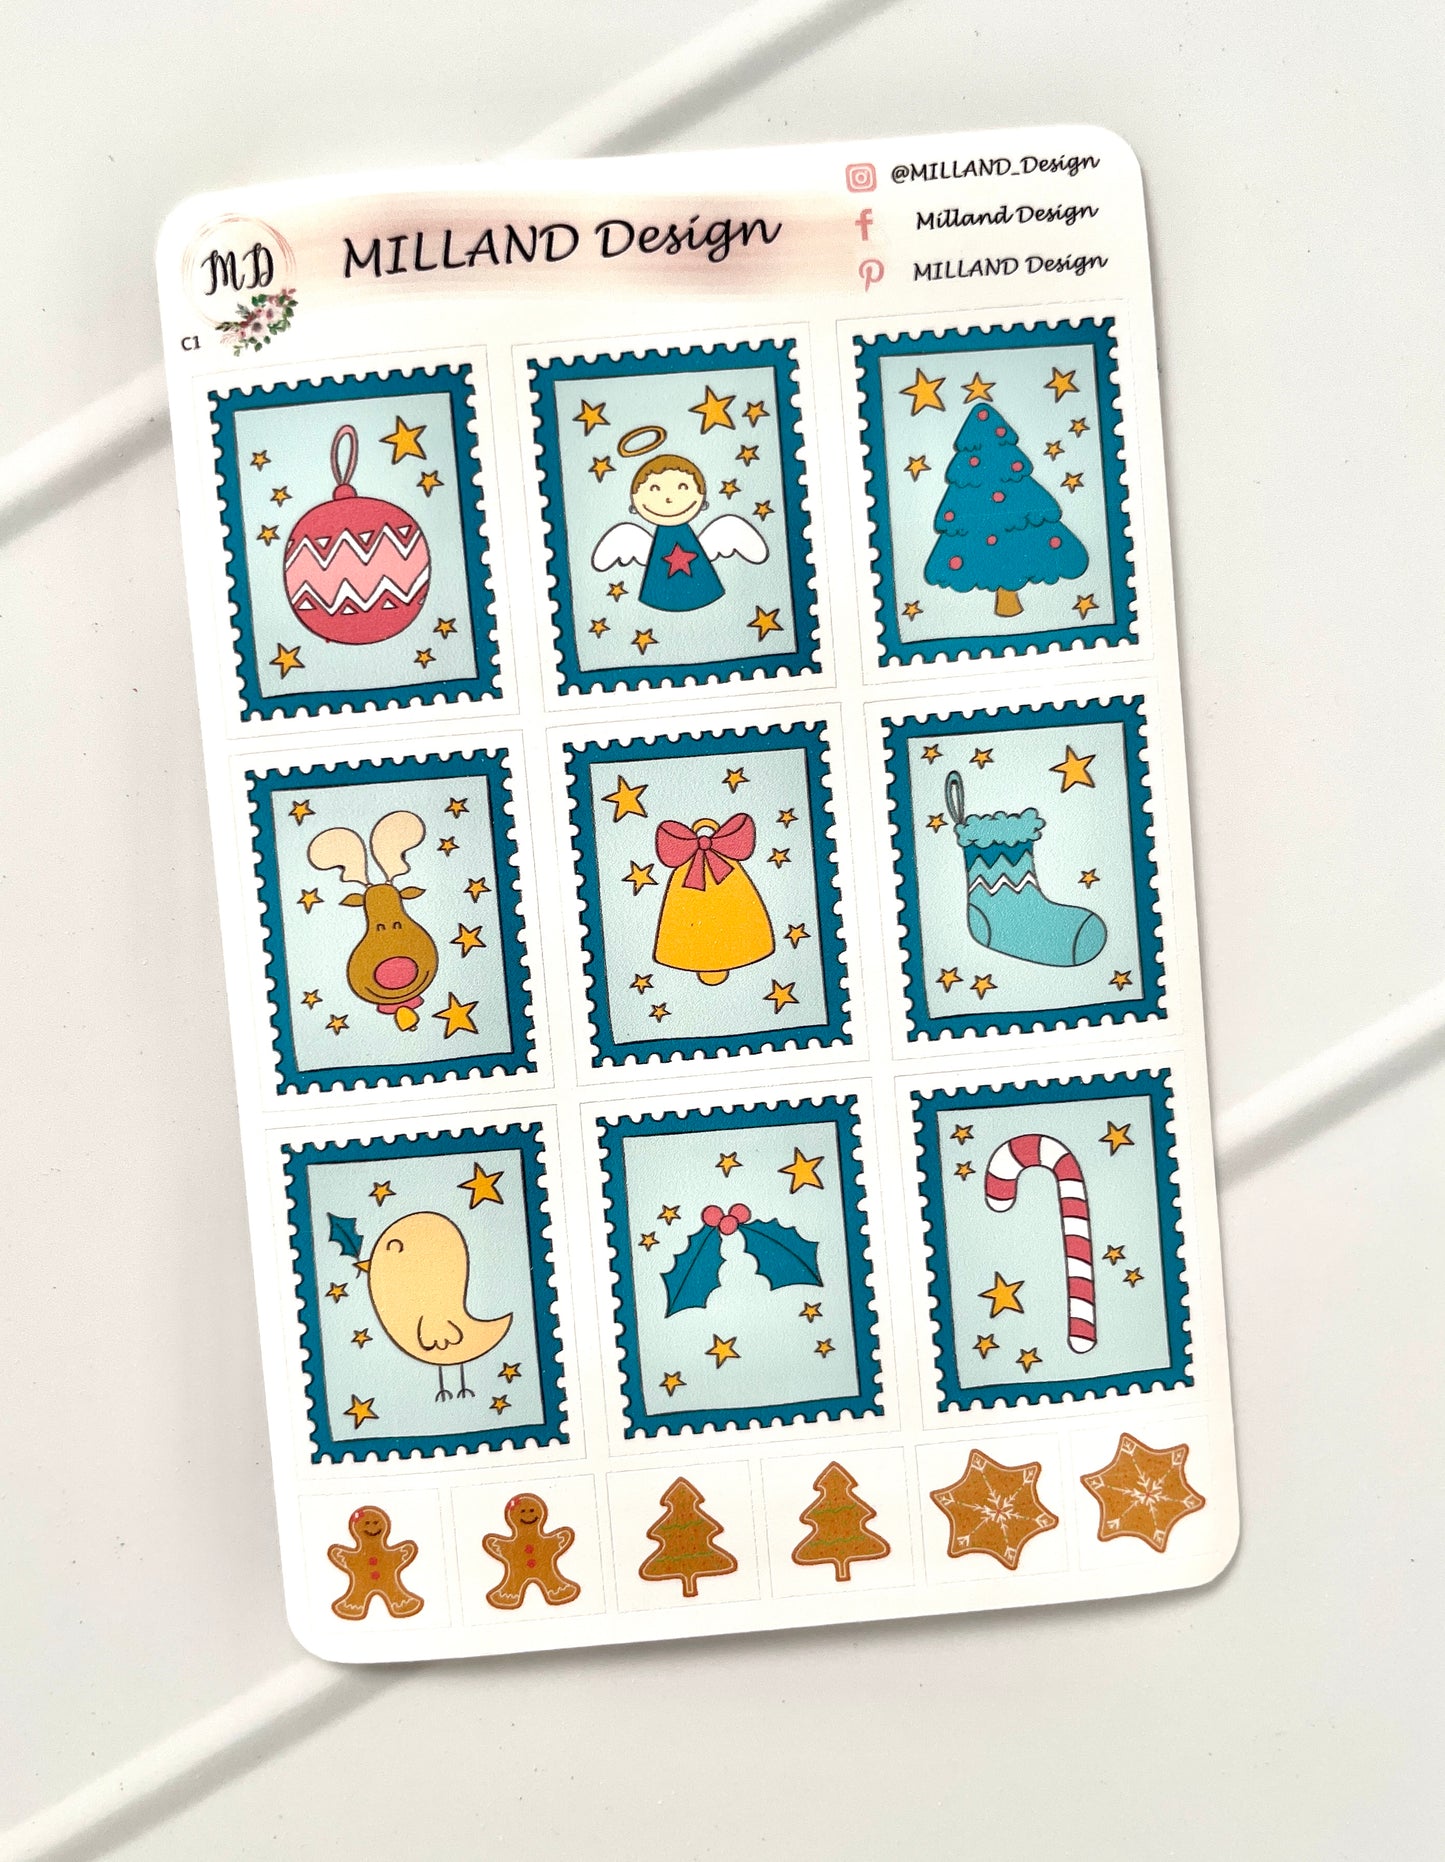 Decorative Christmas Stamps - Embellishment only